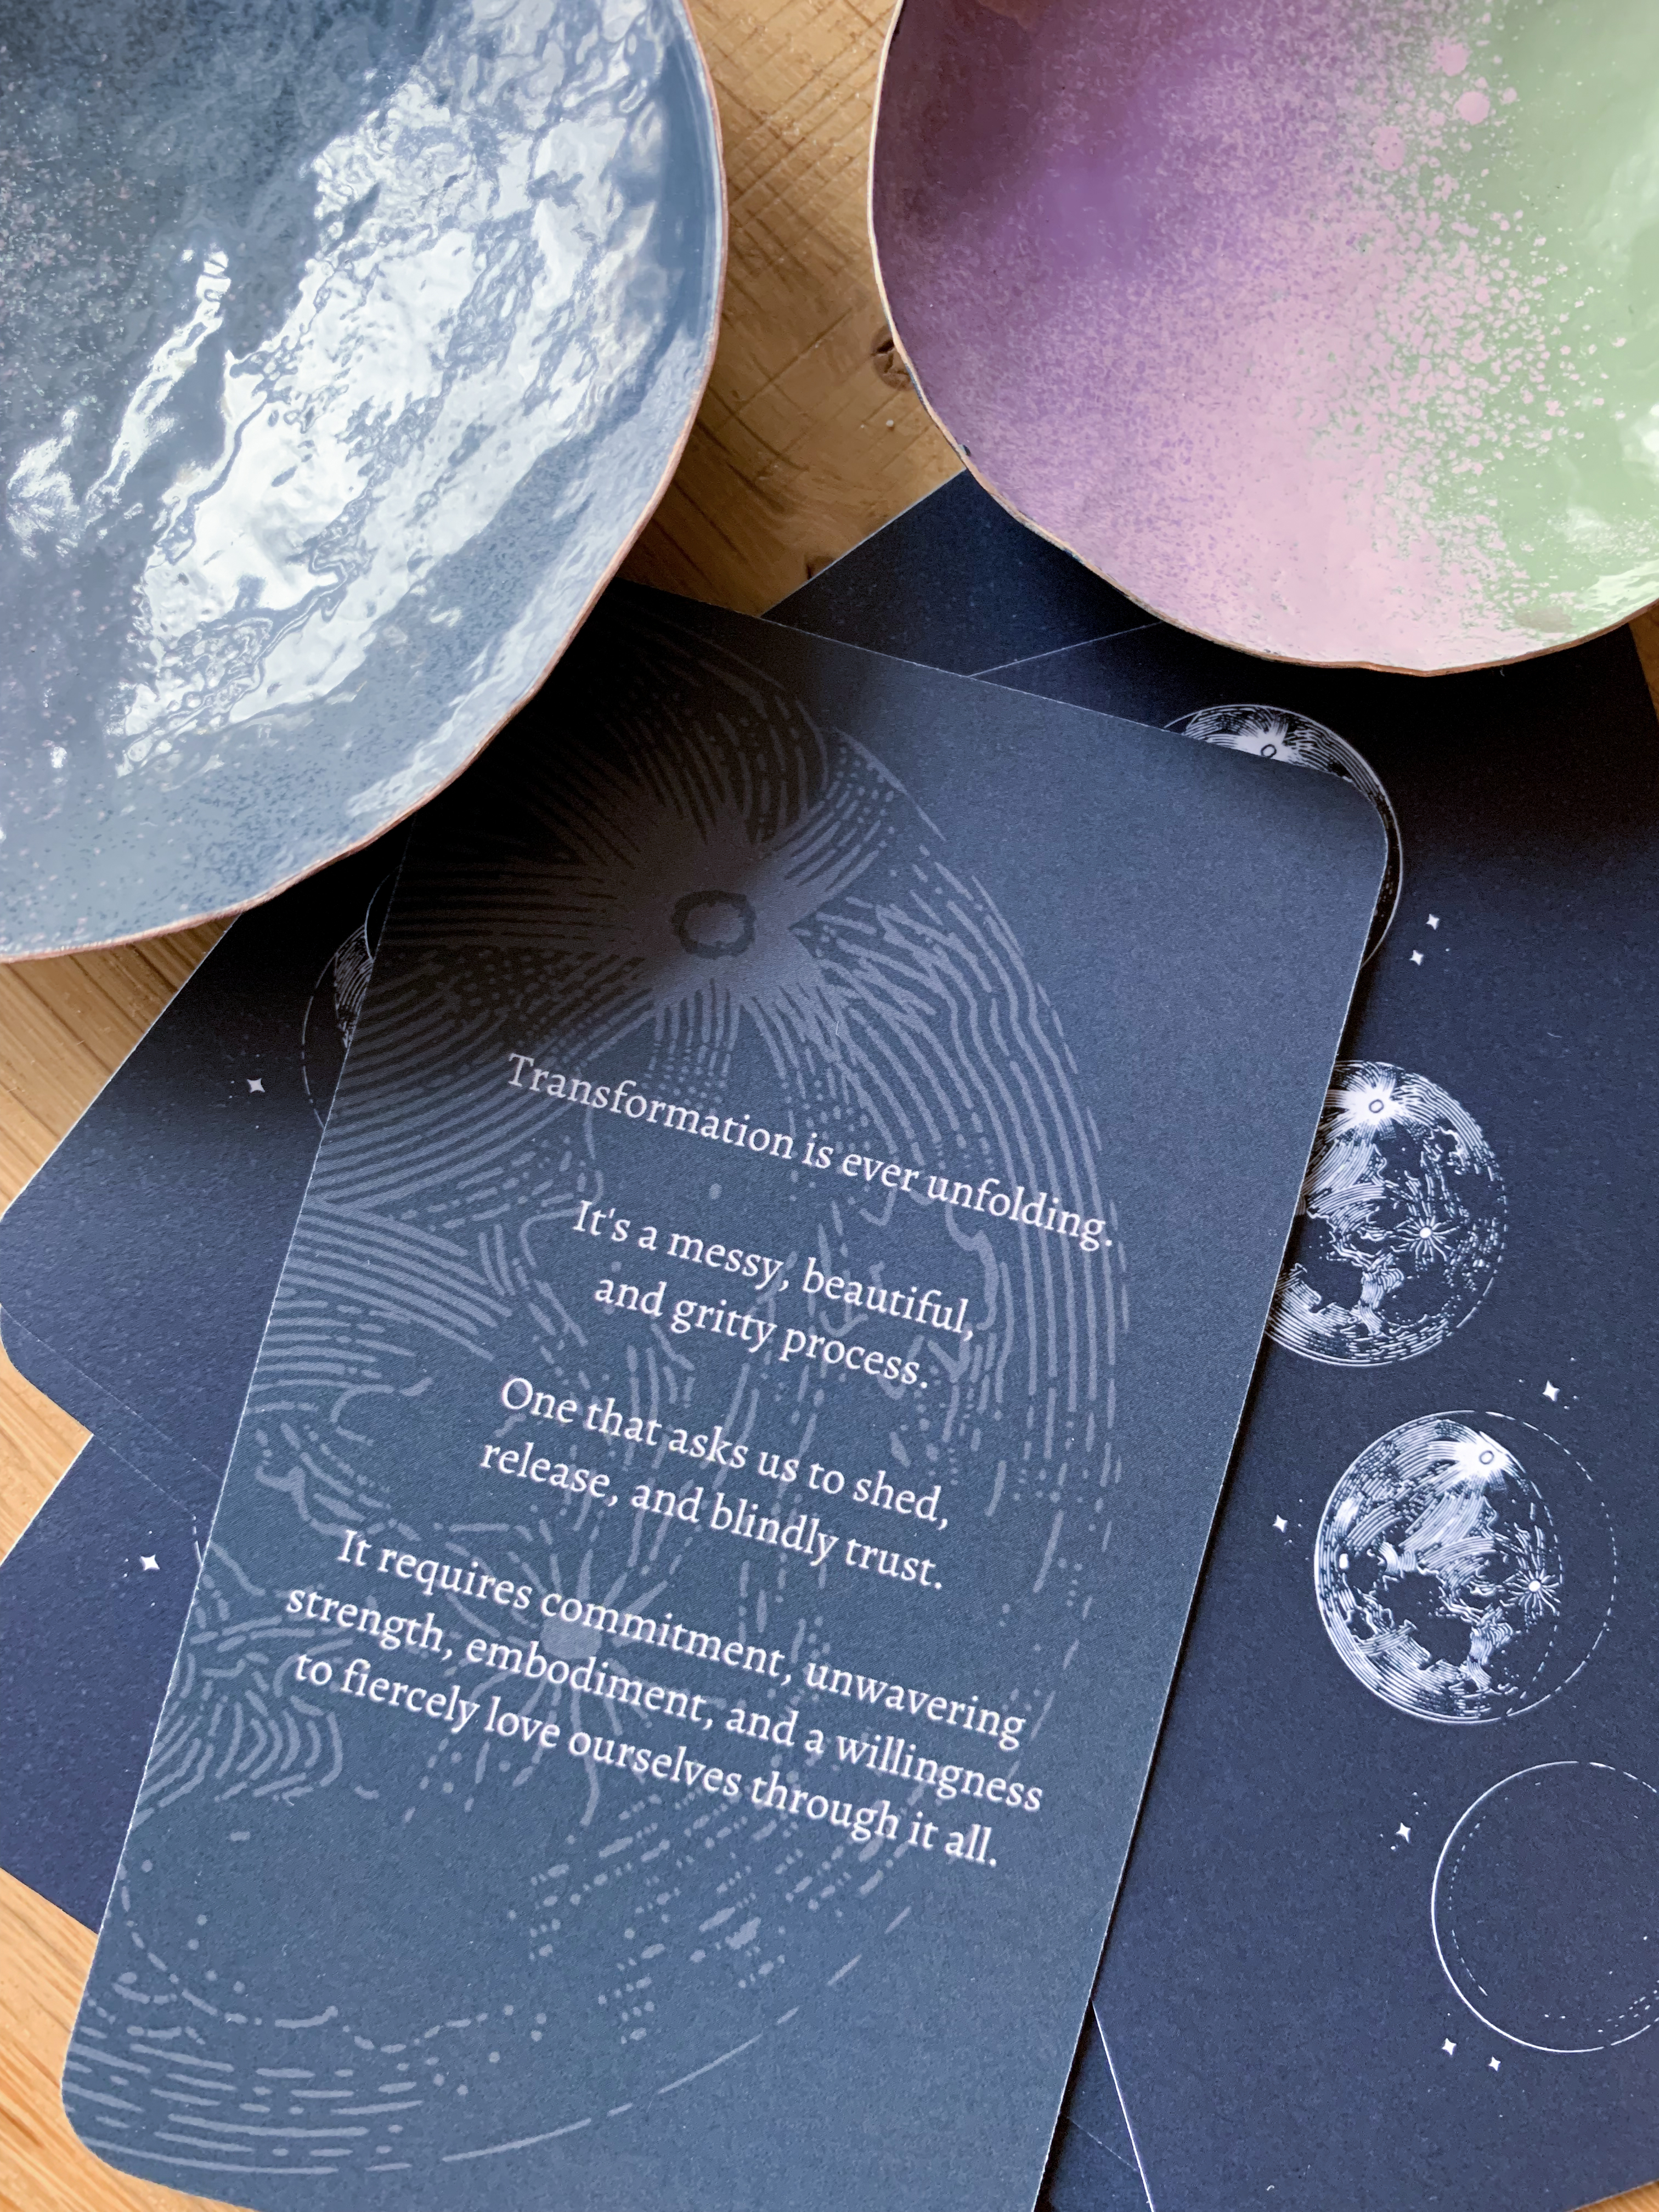 moon mantra oracle deck and colorful copper dishes